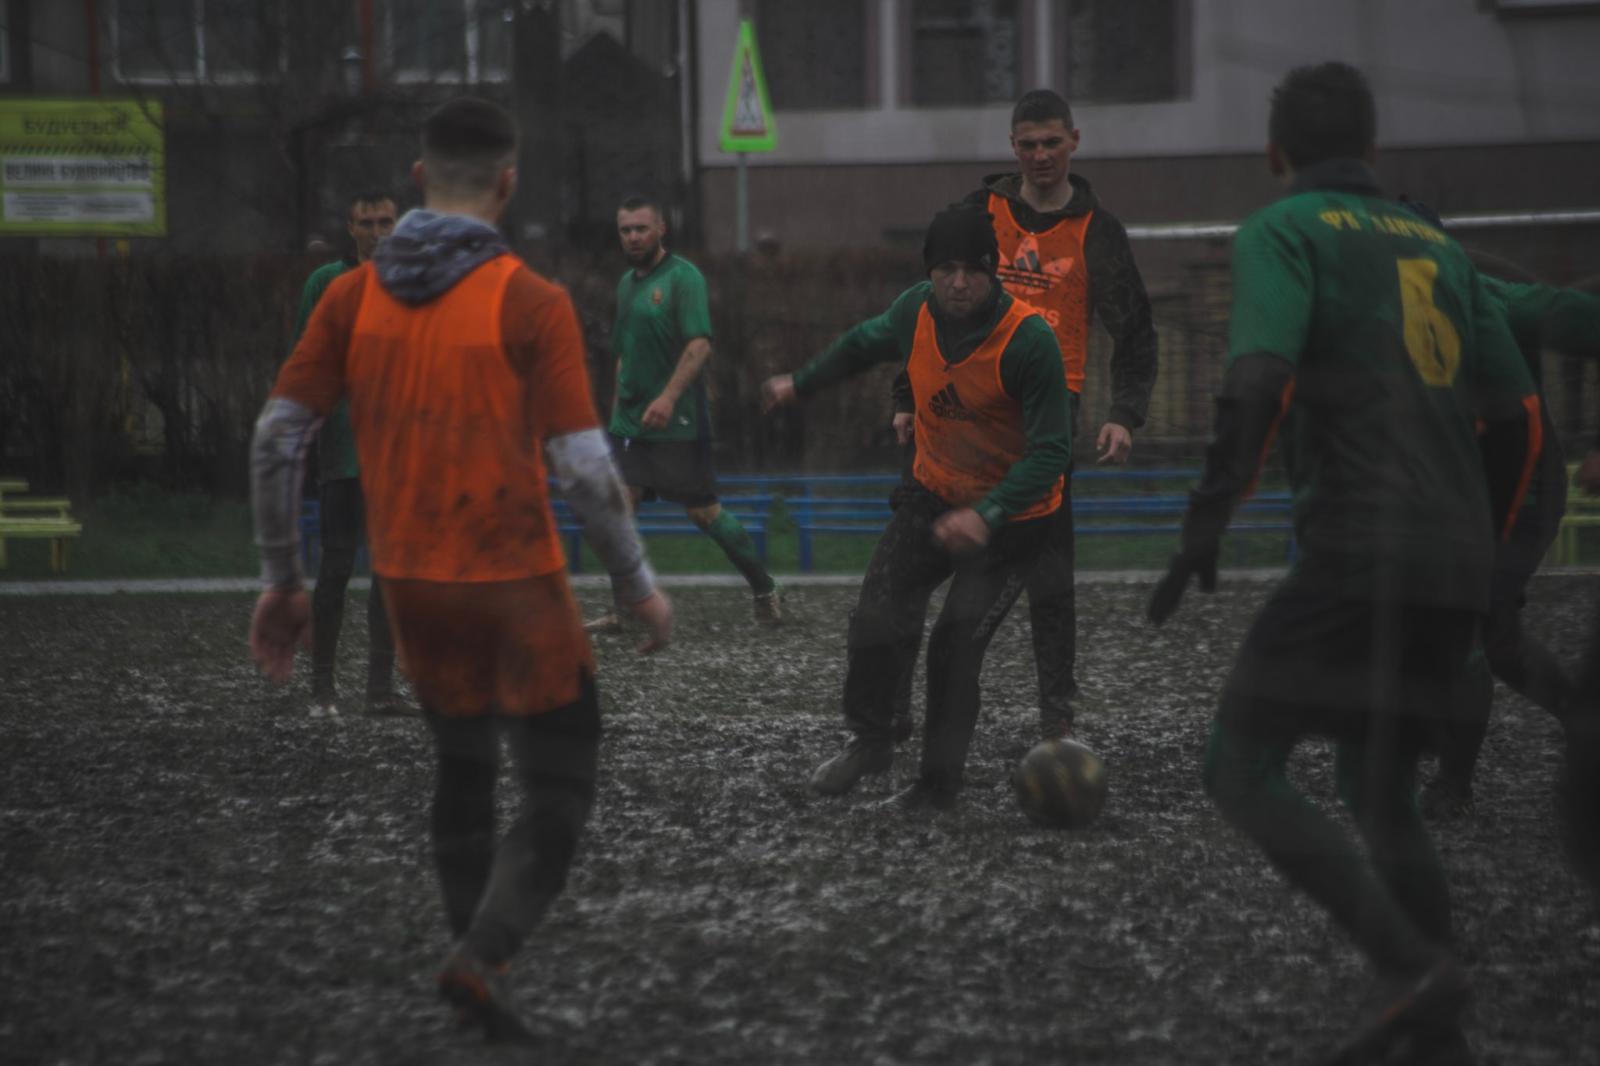 16 April 2022. A charity tournament in support of the Ukrainian armed forces was held in the...